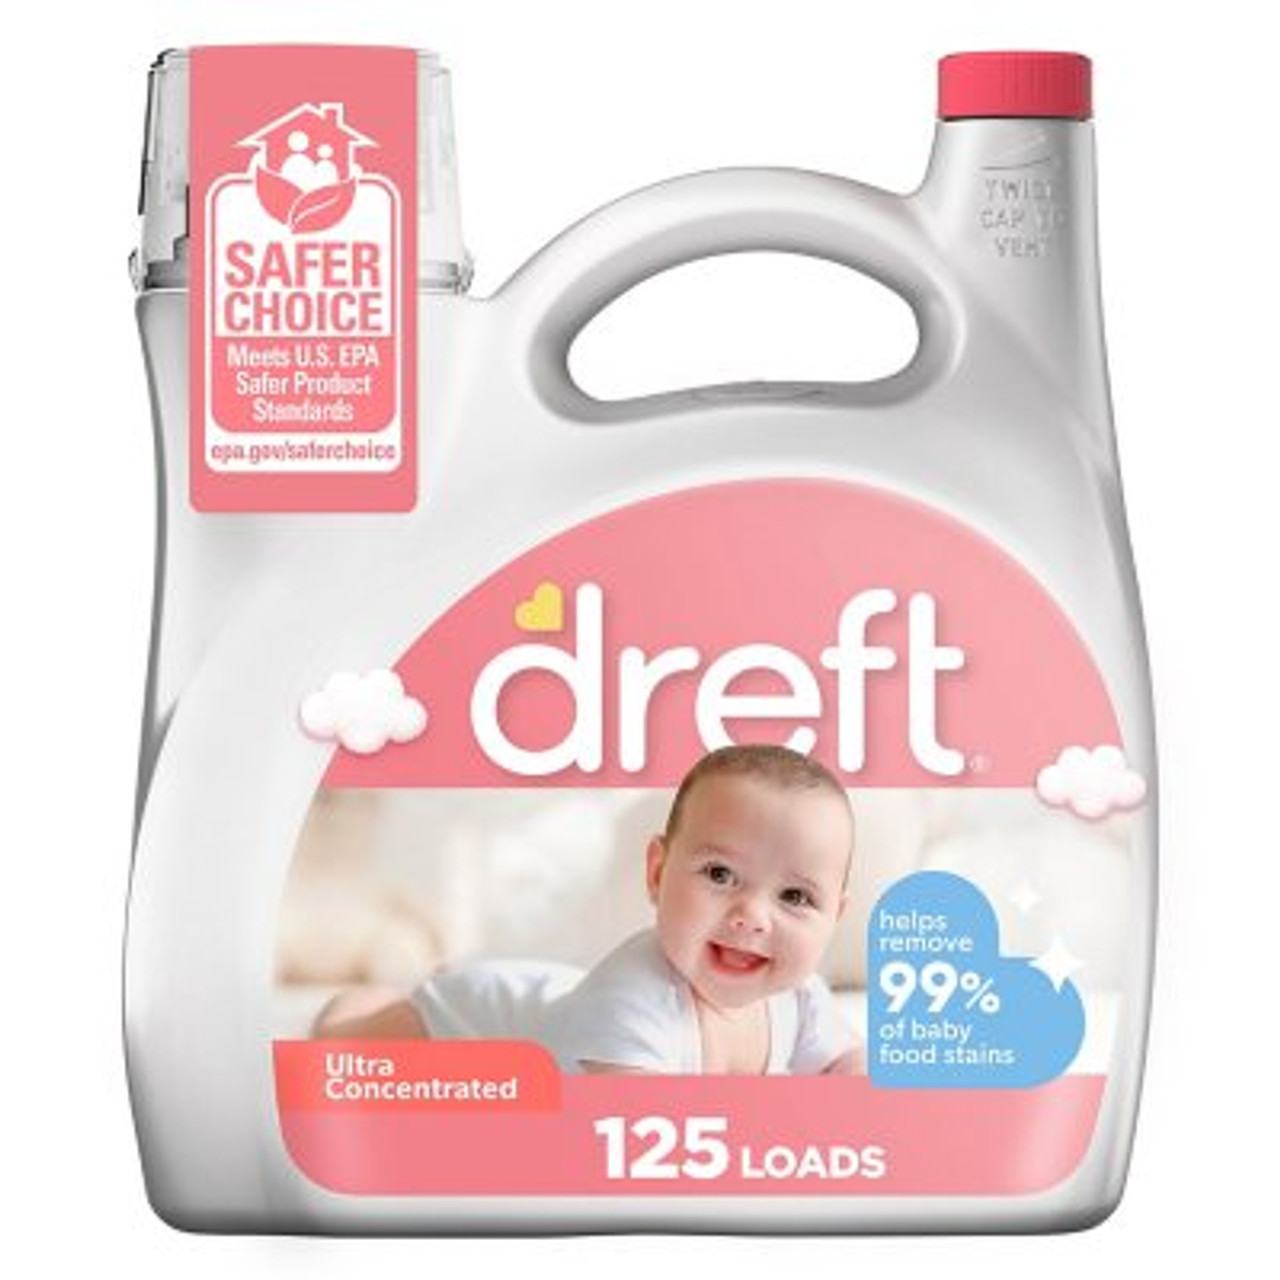 Dreft Ultra Concentrated Liquid Baby Laundry Detergent (125 Loads, 170 fl. oz.) - [From 104.00 - Choose pk Qty ] - *Ships from Miami